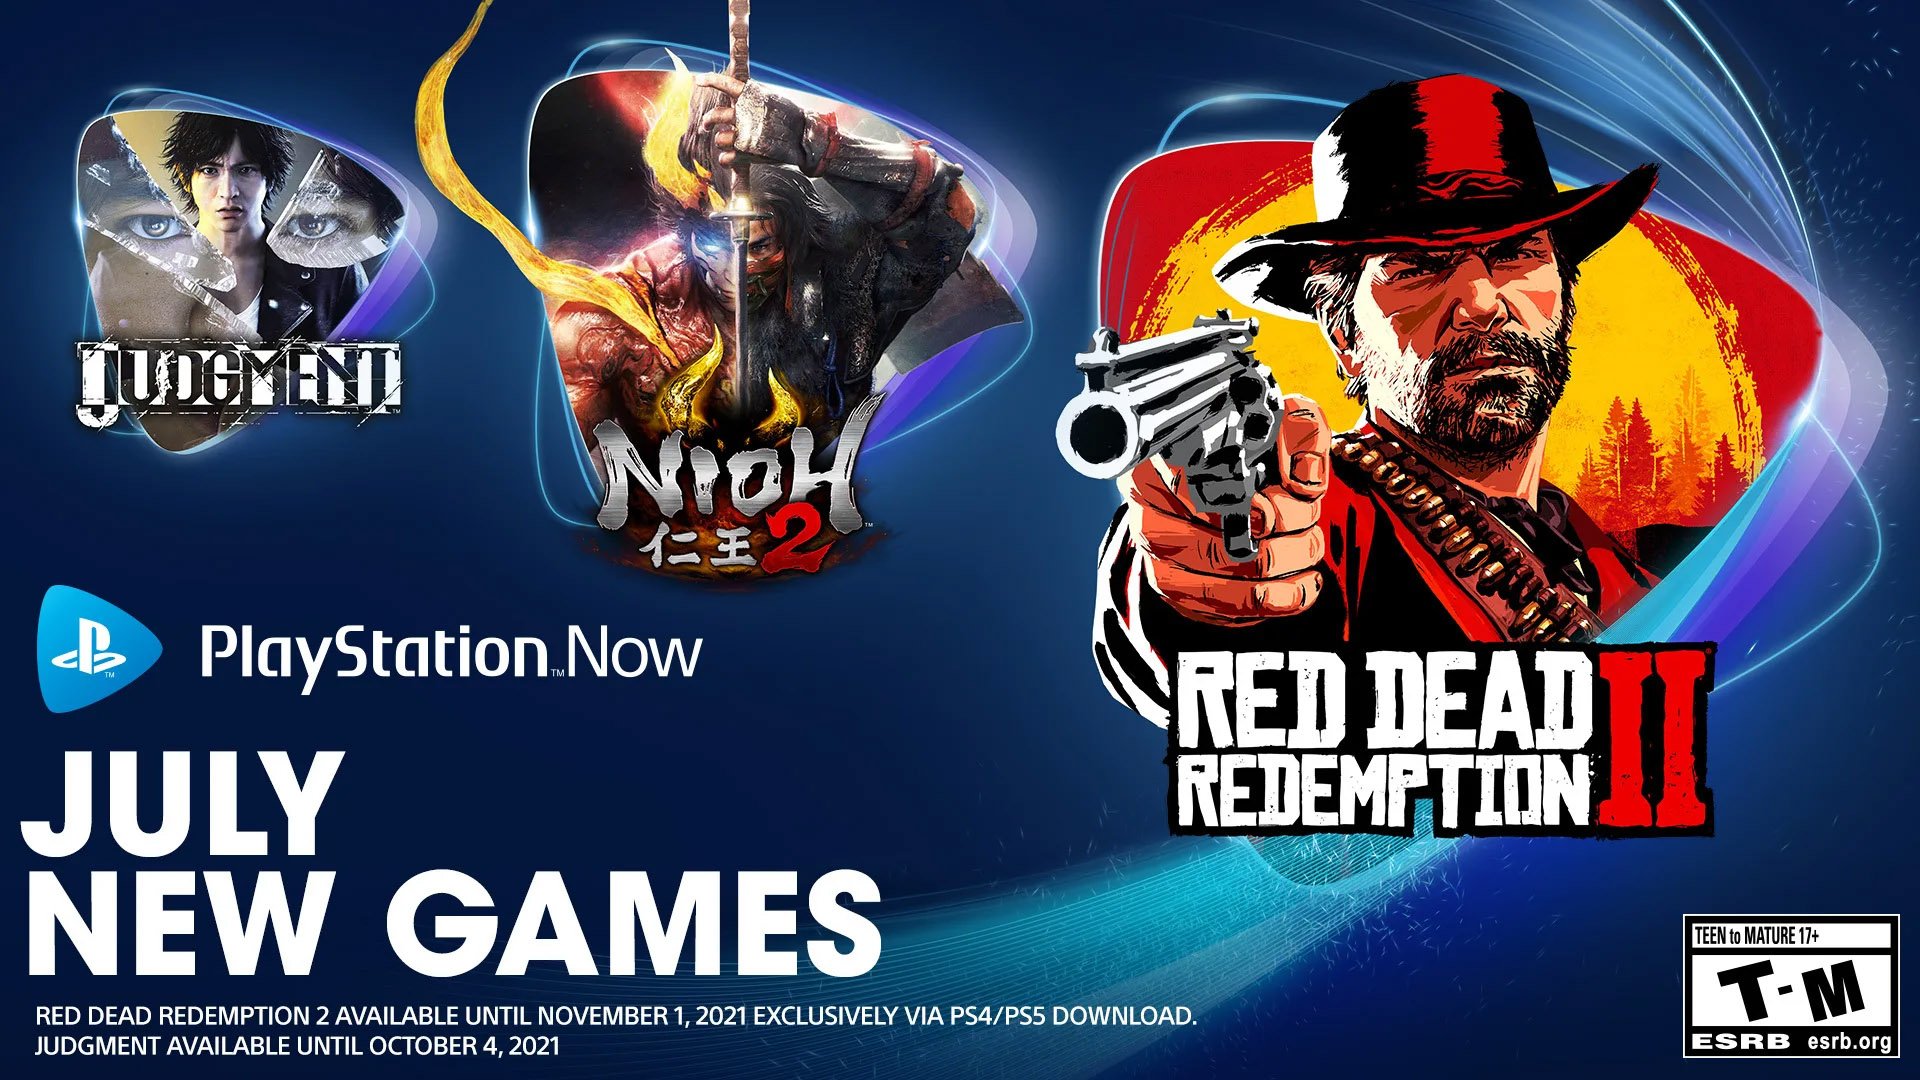 PlayStation Now adds God of War, Judgment, Nioh 2, Red Dead